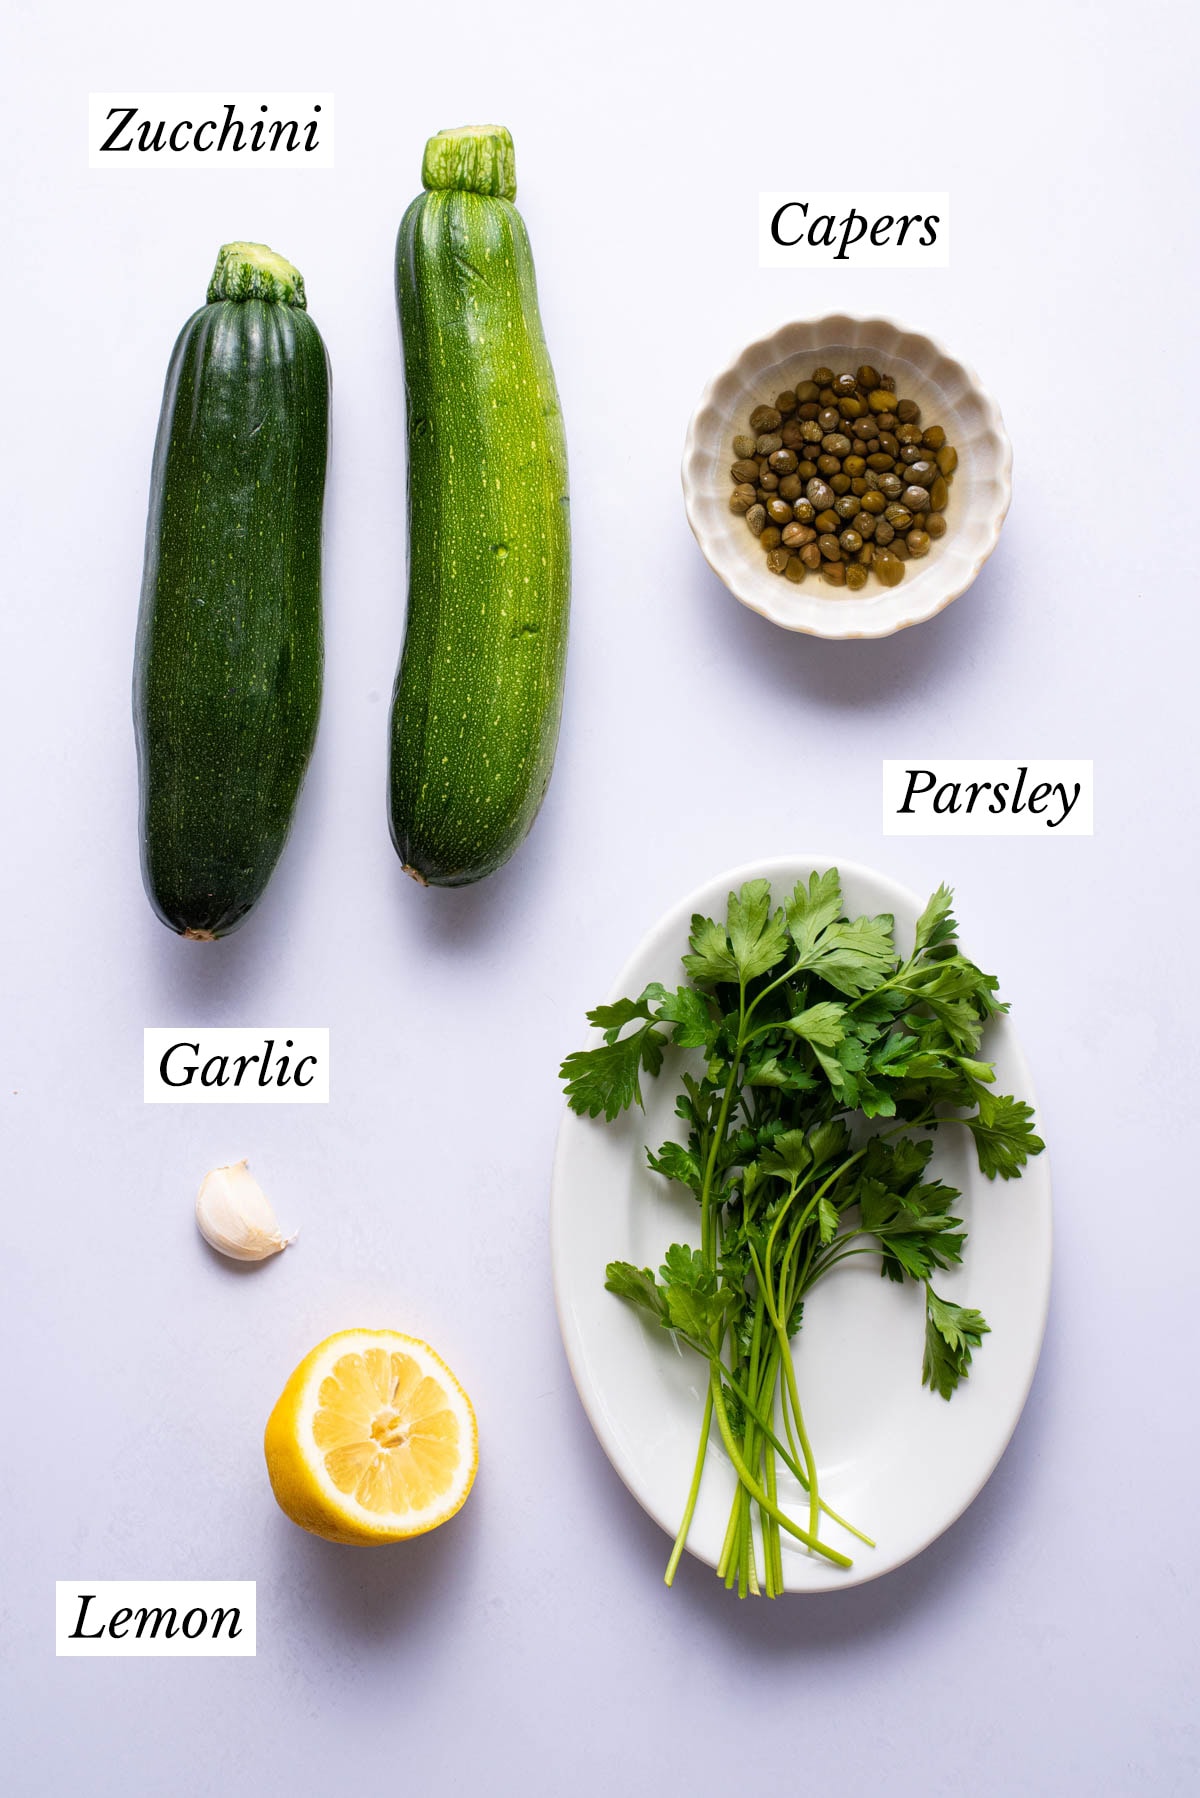 Ingredients gathered to make pan-fried zucchini with capers.